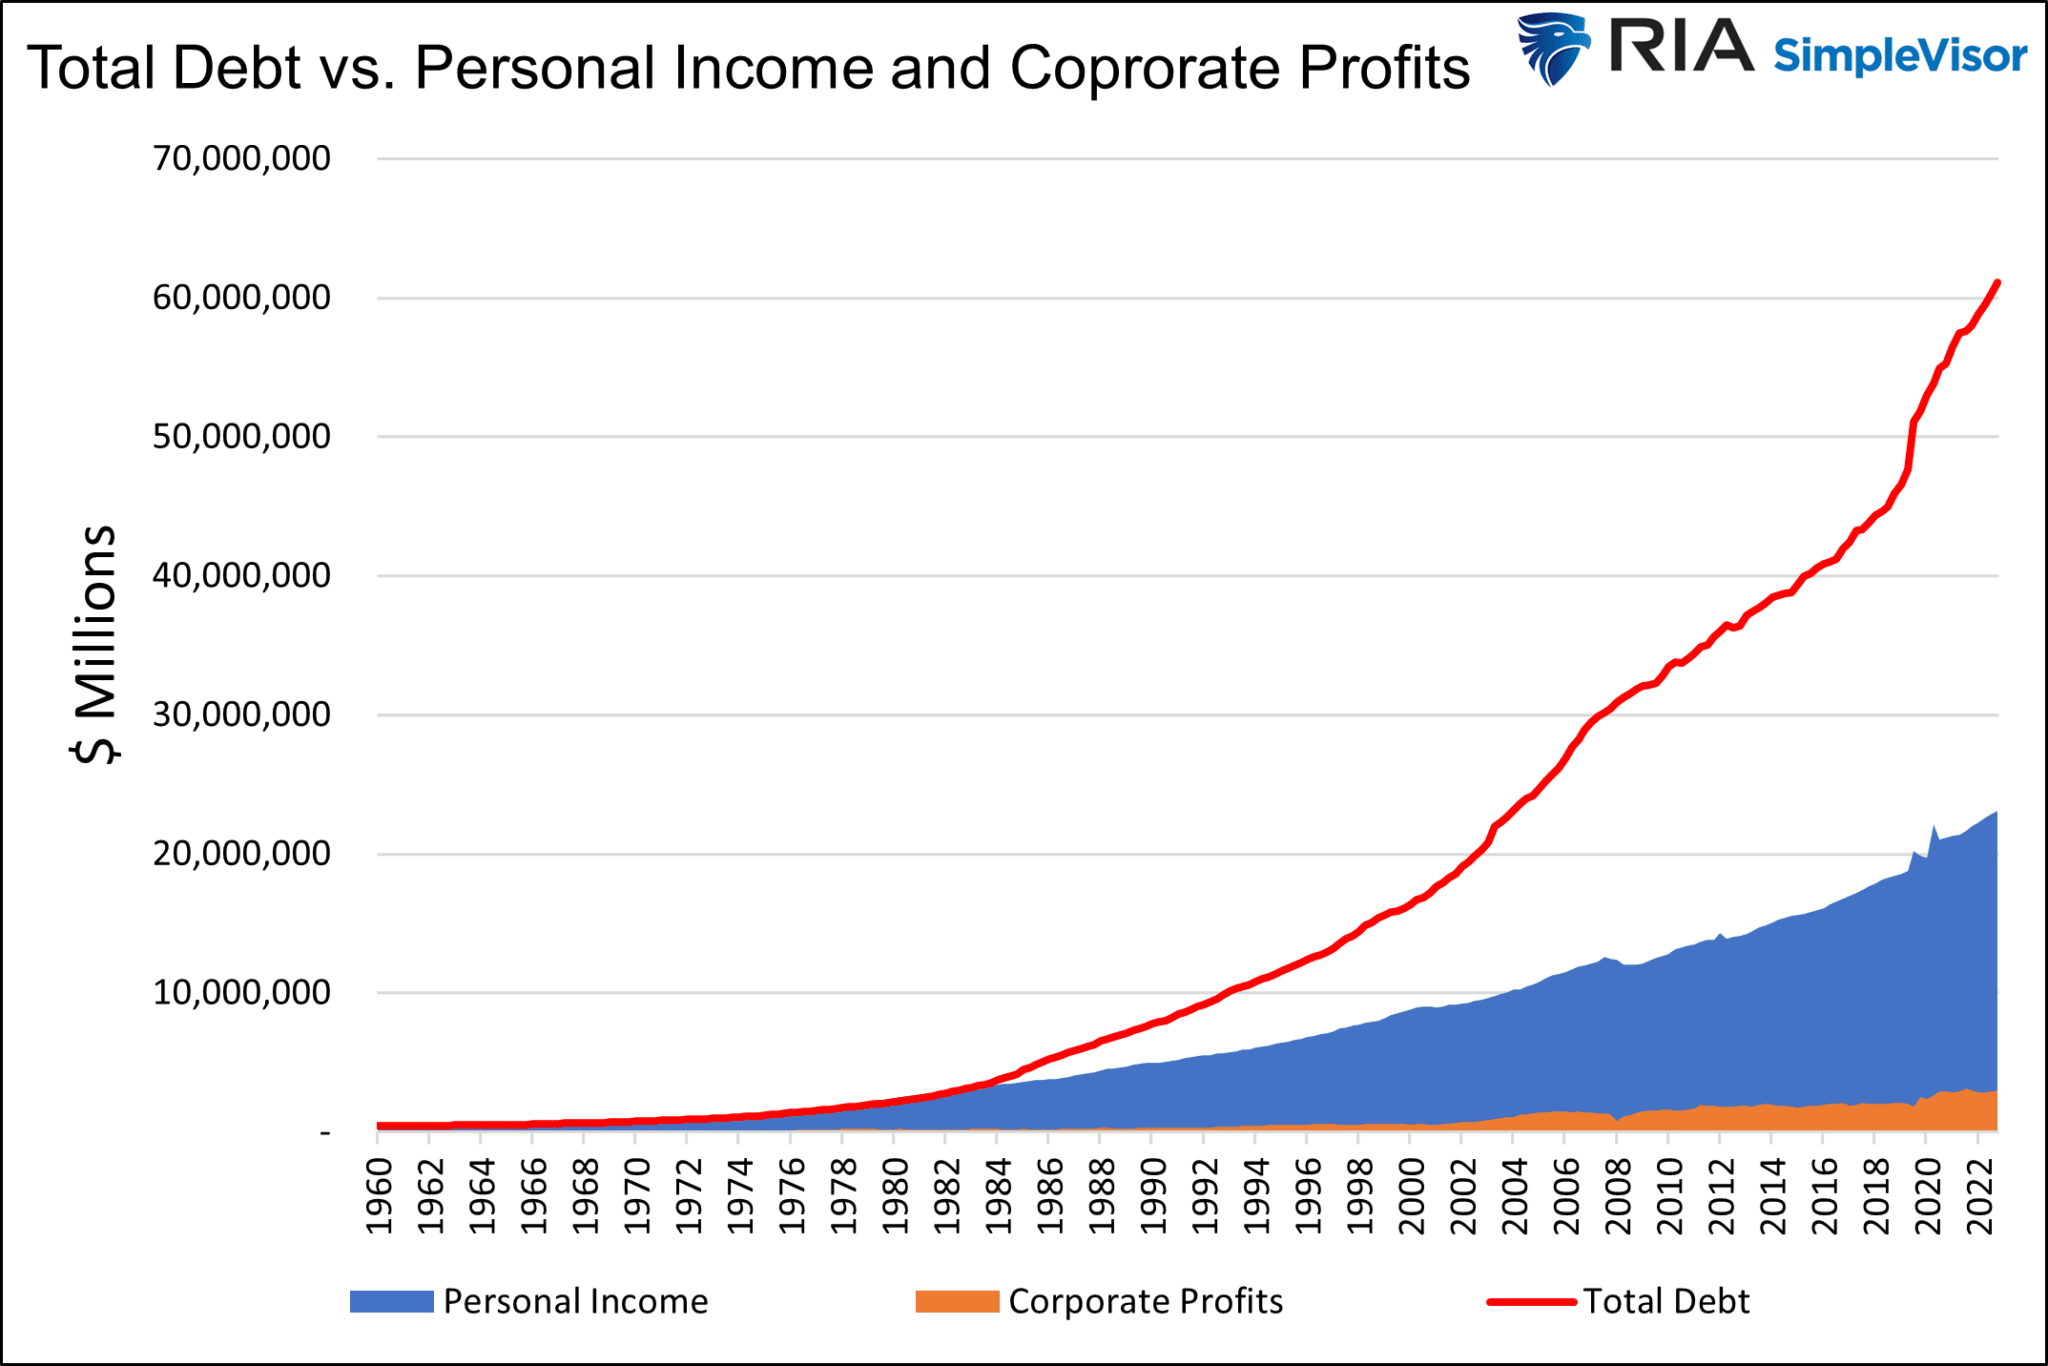 Total Debt Vs Personal and Corporate Income